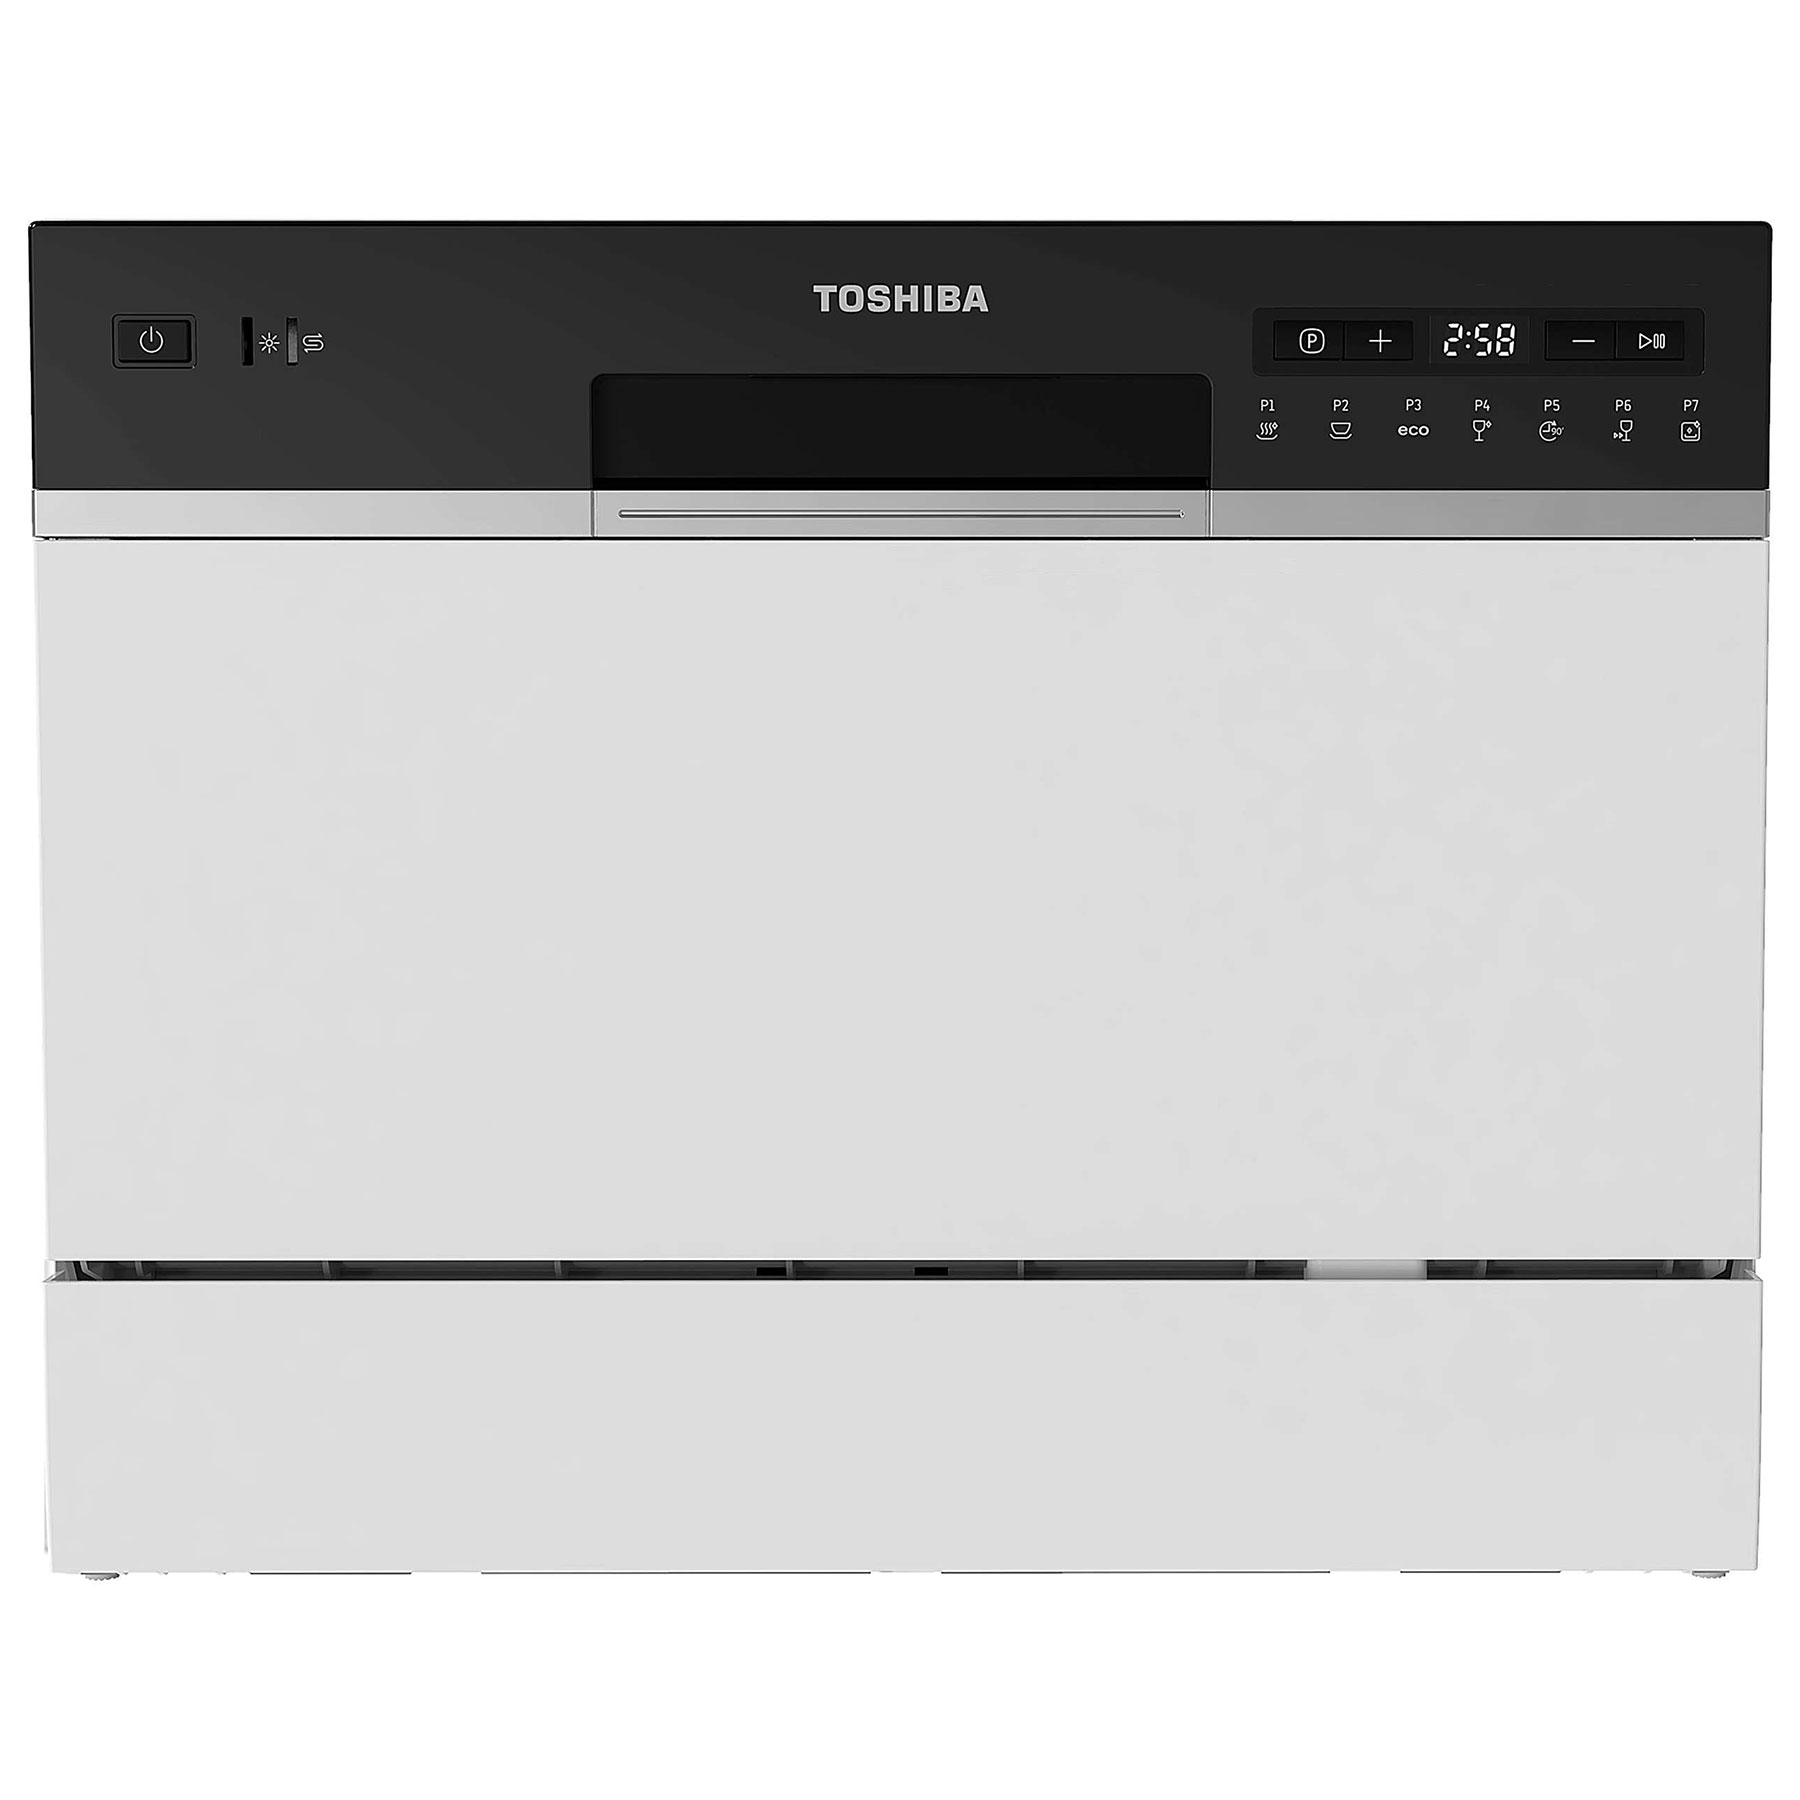 Toshiba DW 06T2W Table Top Dishwasher in White 6 Place Settings F Rate